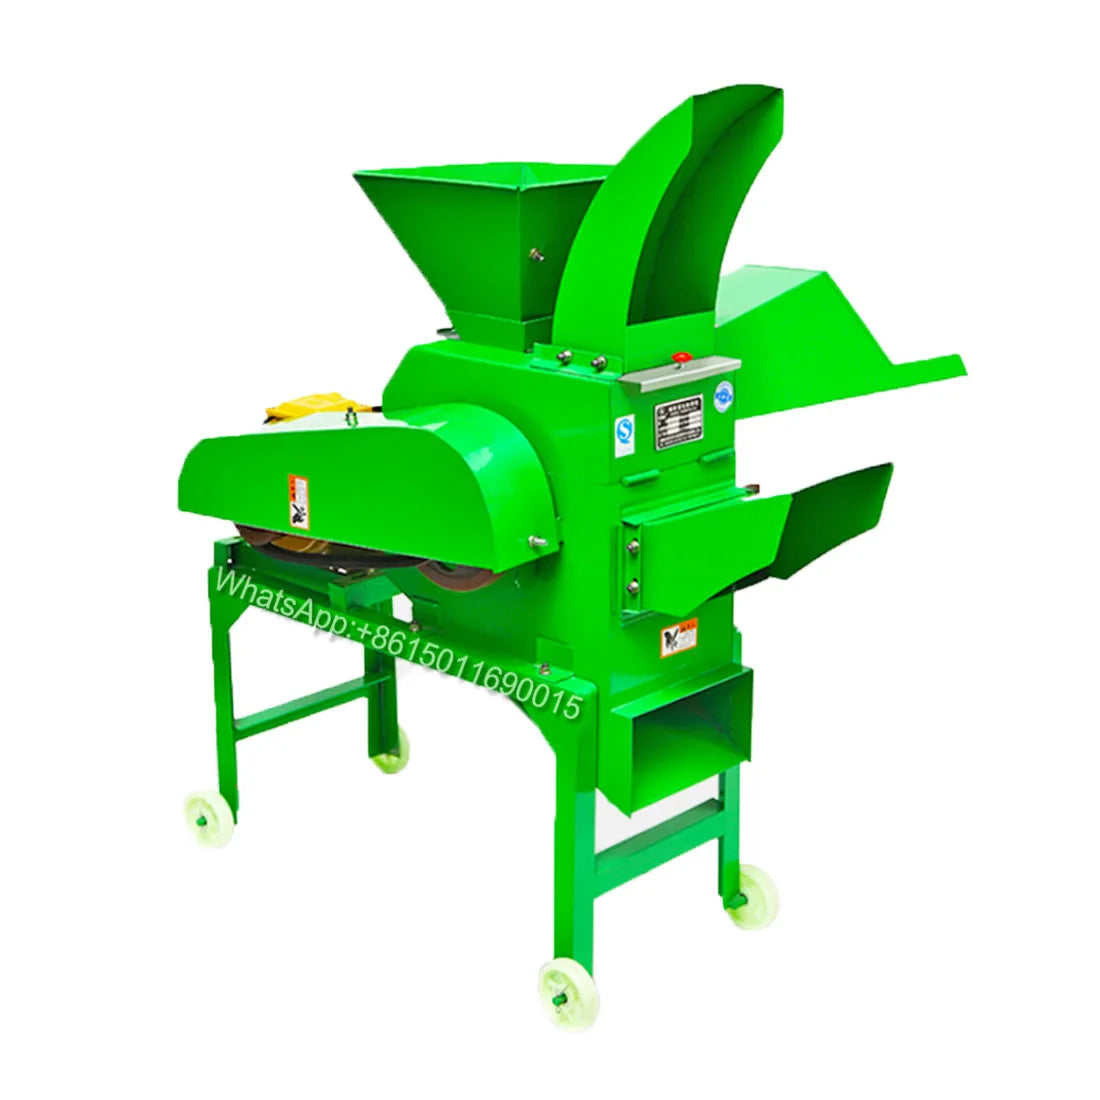 Shredded Grass Machine Kneading Machine Grinder With 2.2kw Motor Home Breeding Universal Feed Machine For Dry And Wet Dual Use